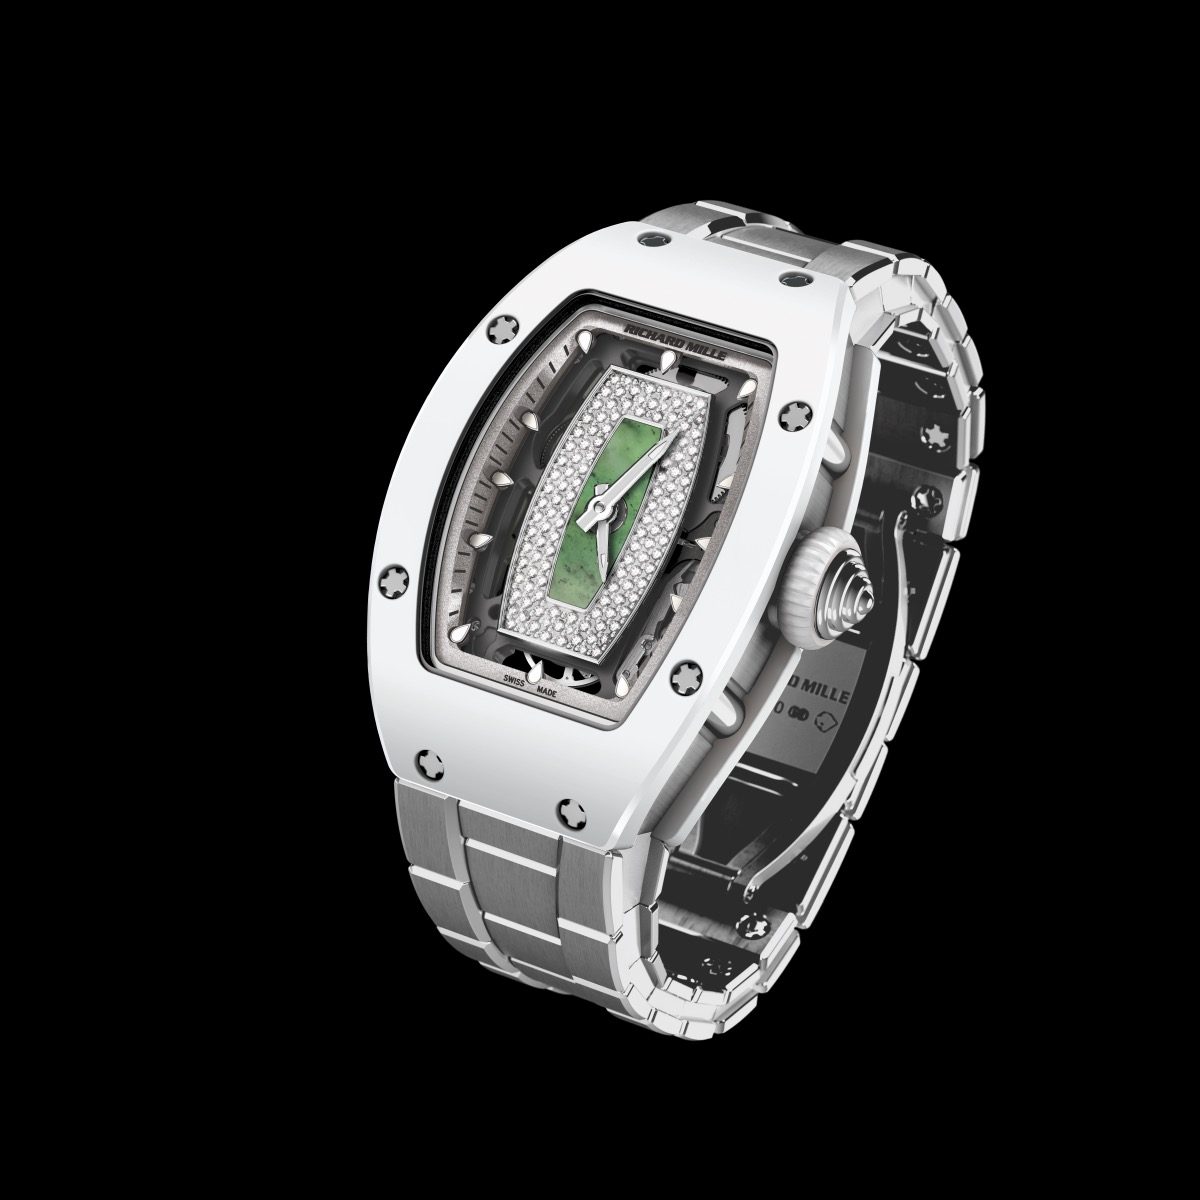 Richard Mille RM 07-01 Replica Ladies’ Watches UK With Green Dials For Introduction